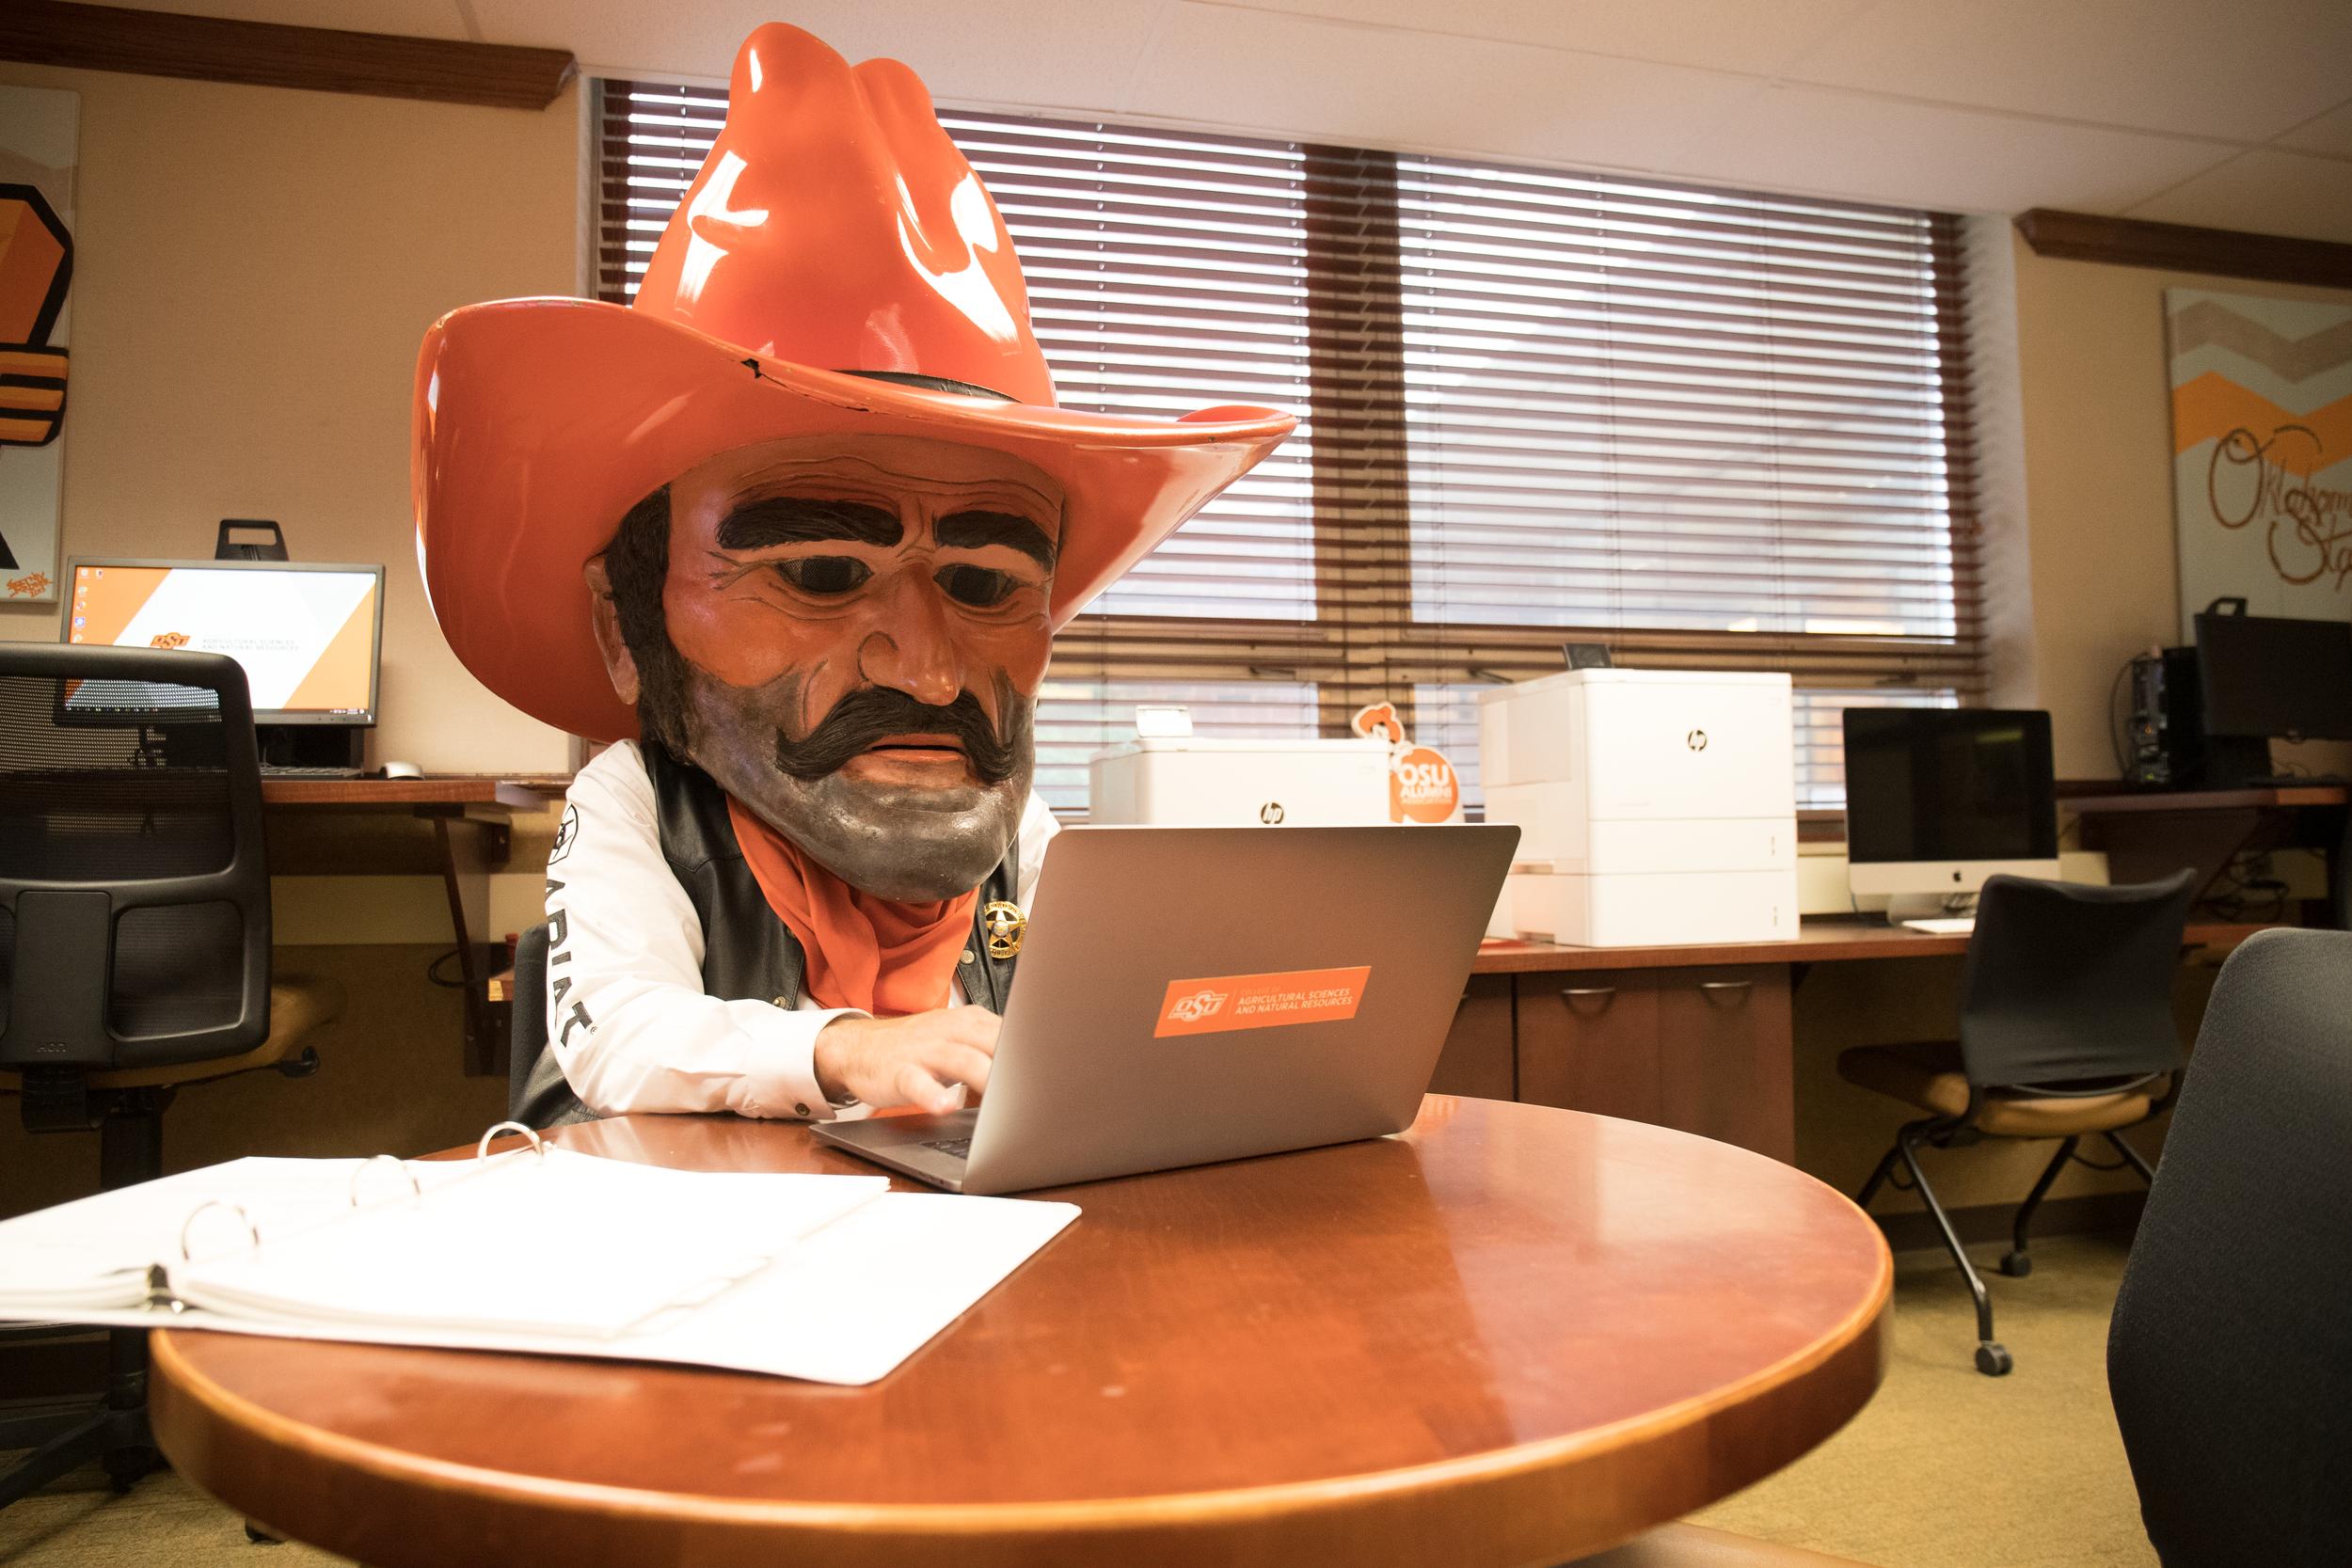 Pistol Pete works on a laptop computer in an office.